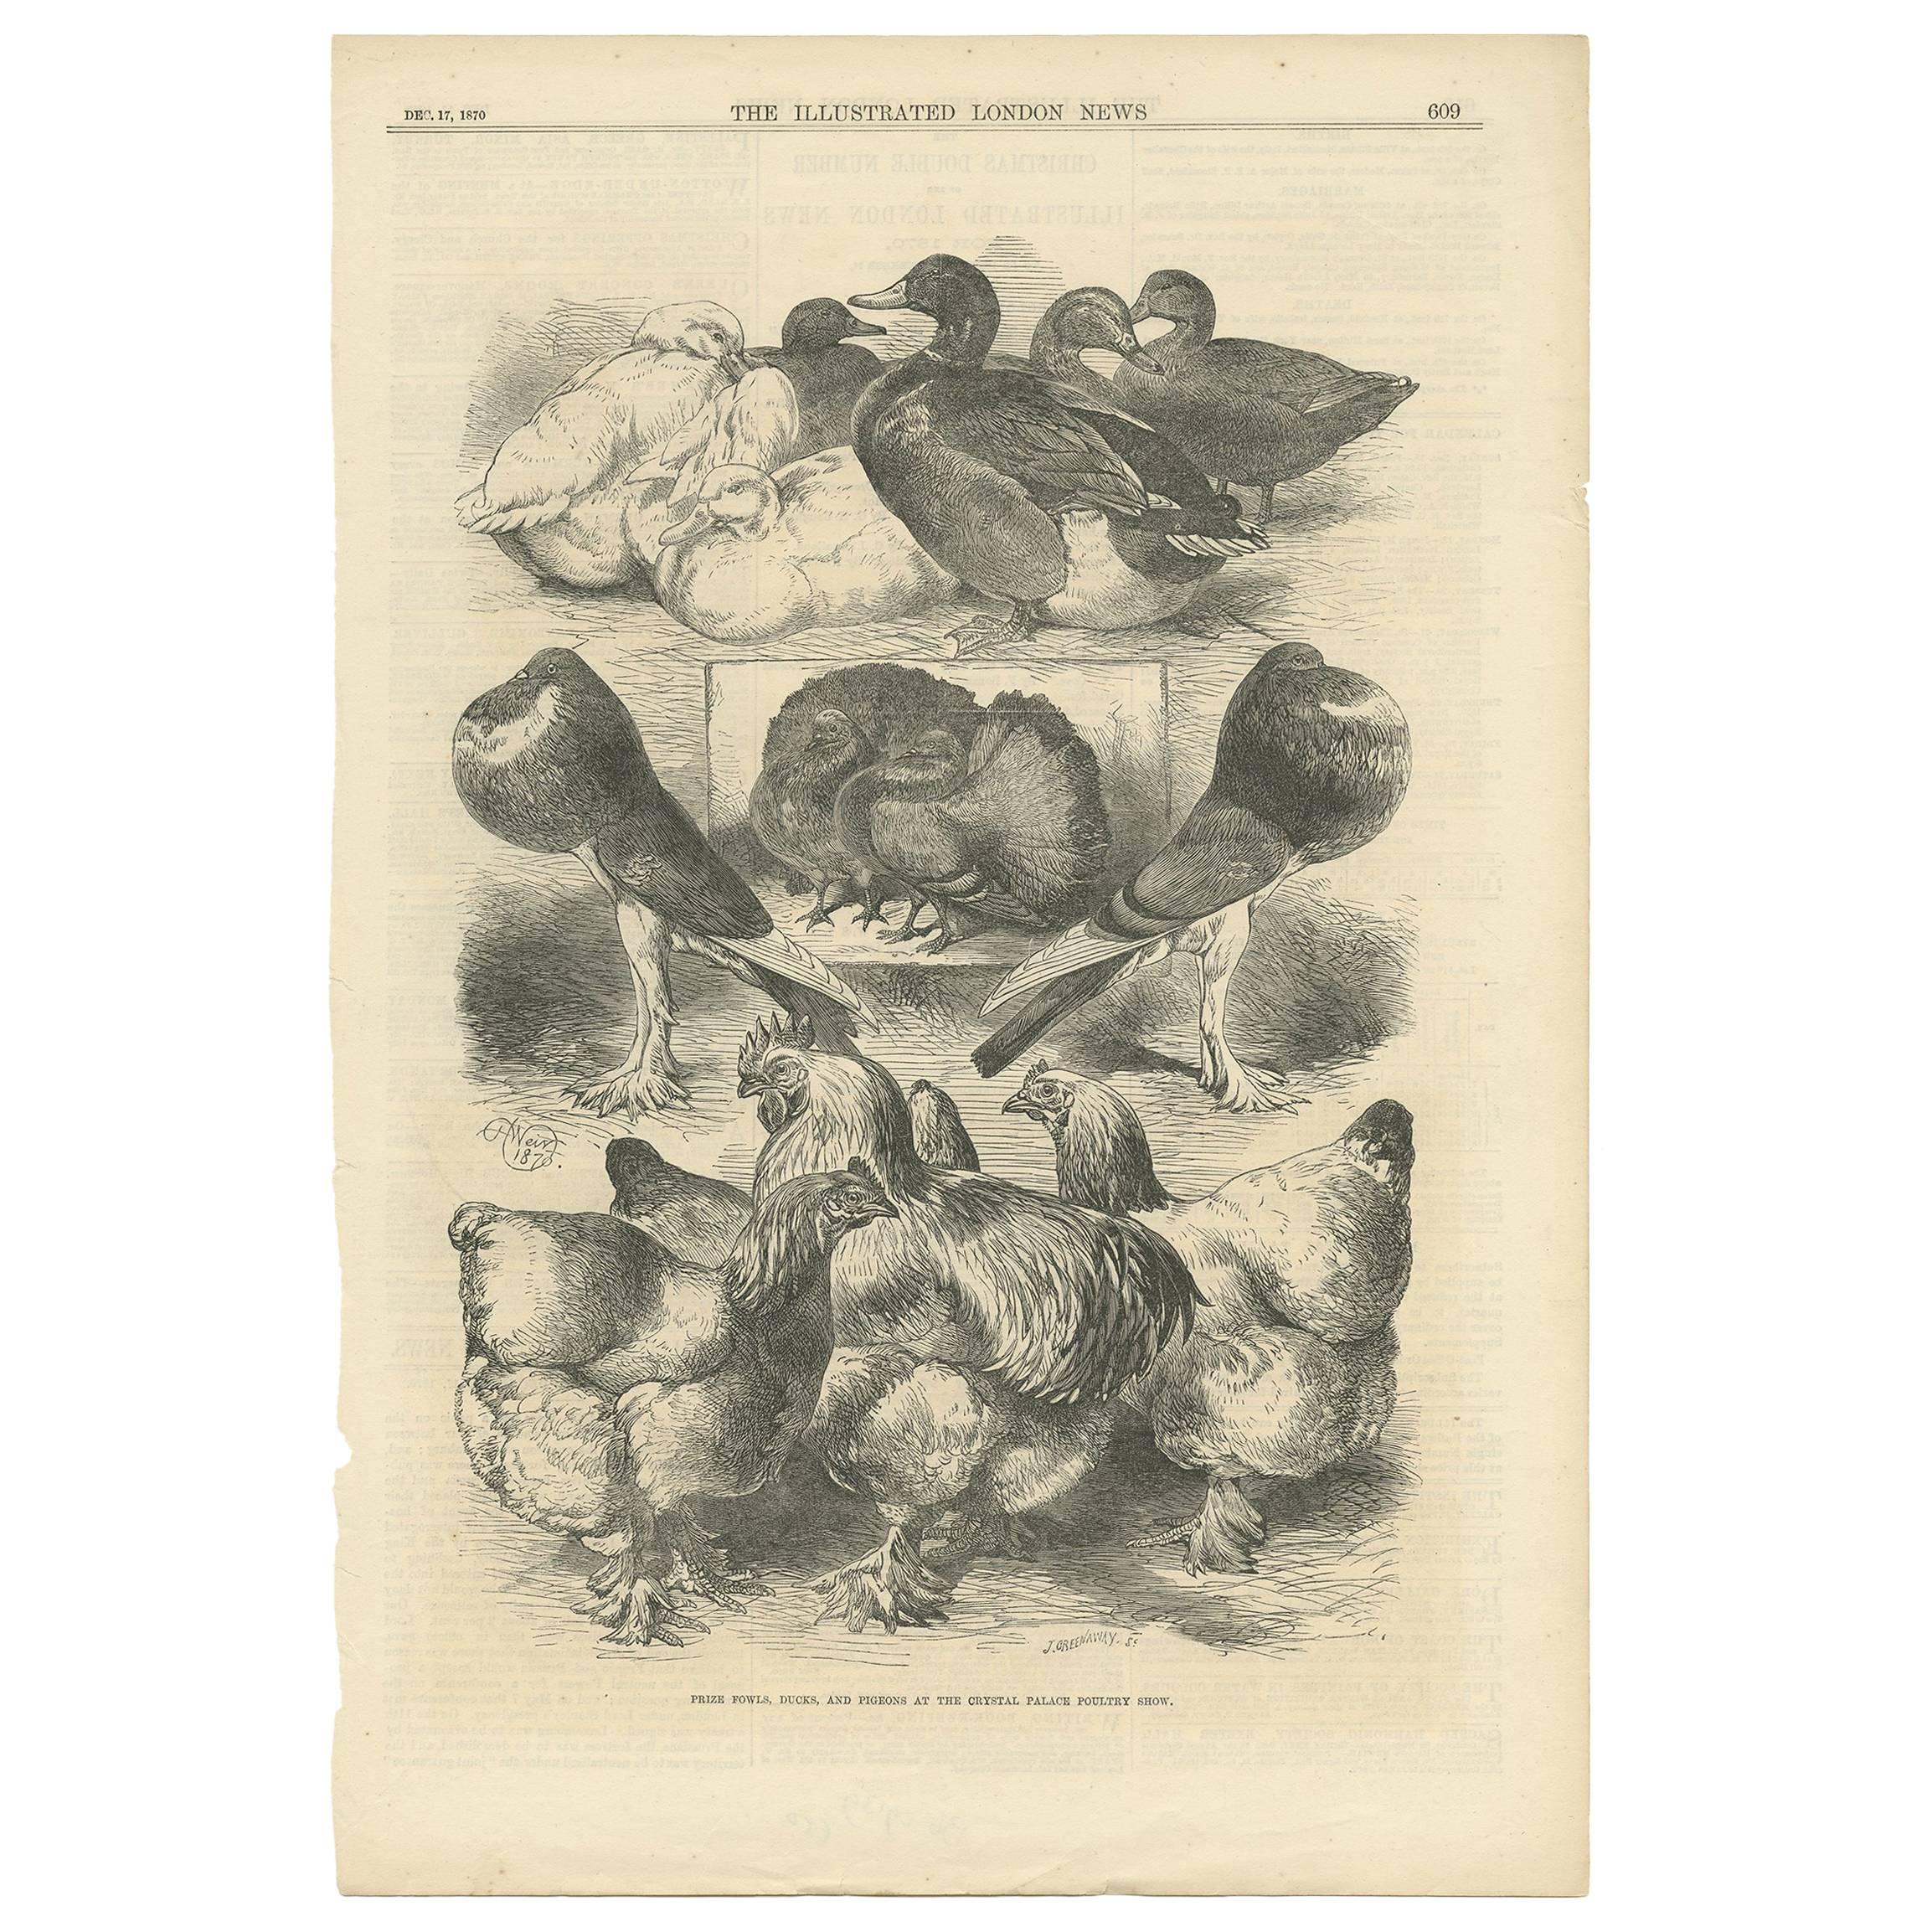 Antique Print of Prize Fowls, Ducks & Pigeons at the Crystal Palace Poultry Show For Sale